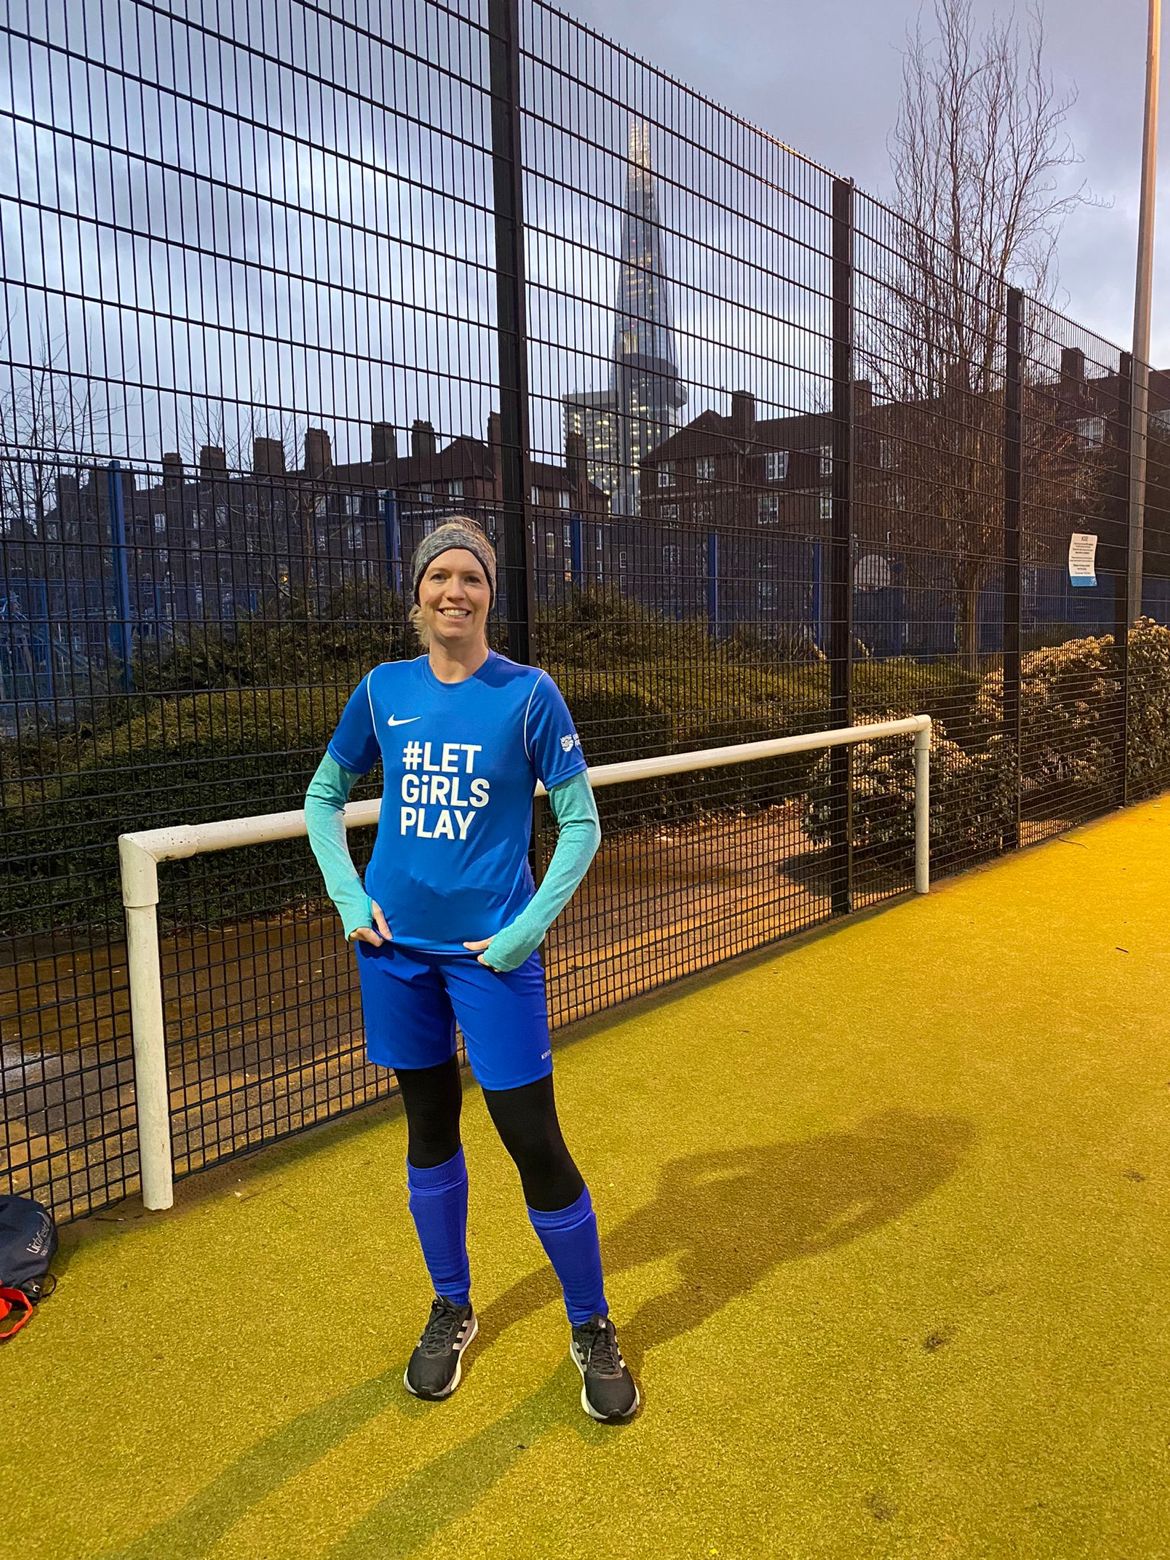 Emily Robinson at football wearing a shirt that says 'Let girls play'